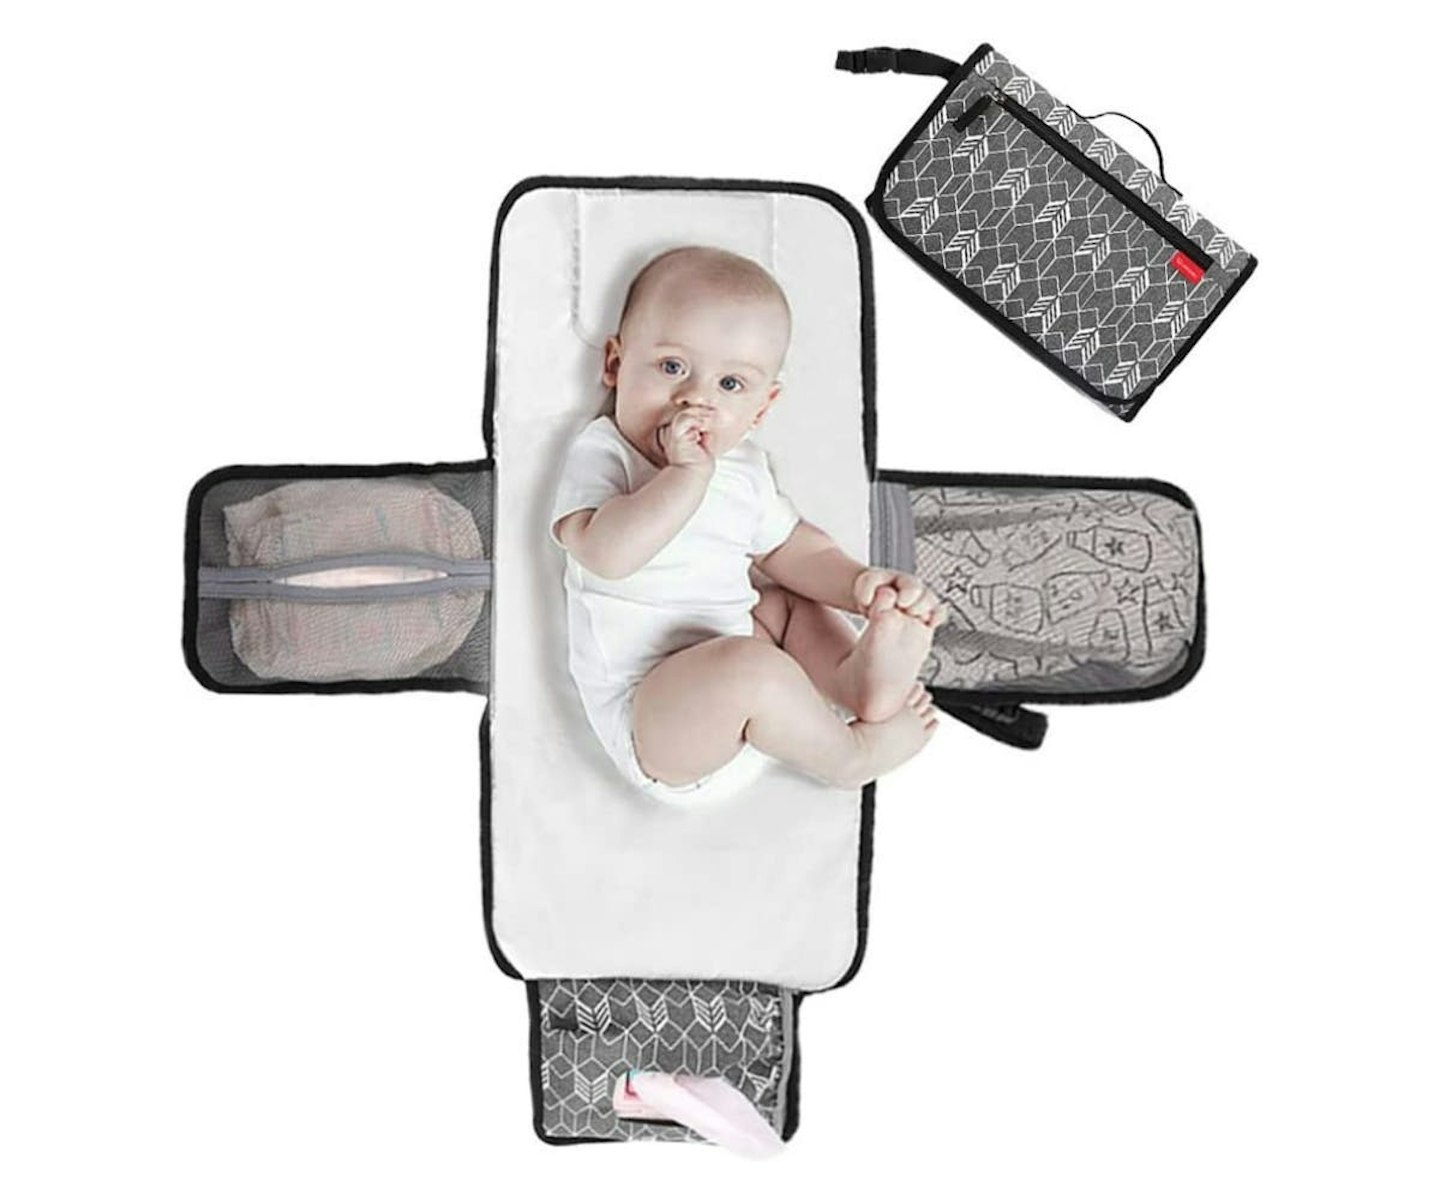 13 Best Diaper Changing Pads in 2022 - Baby Changing Mats